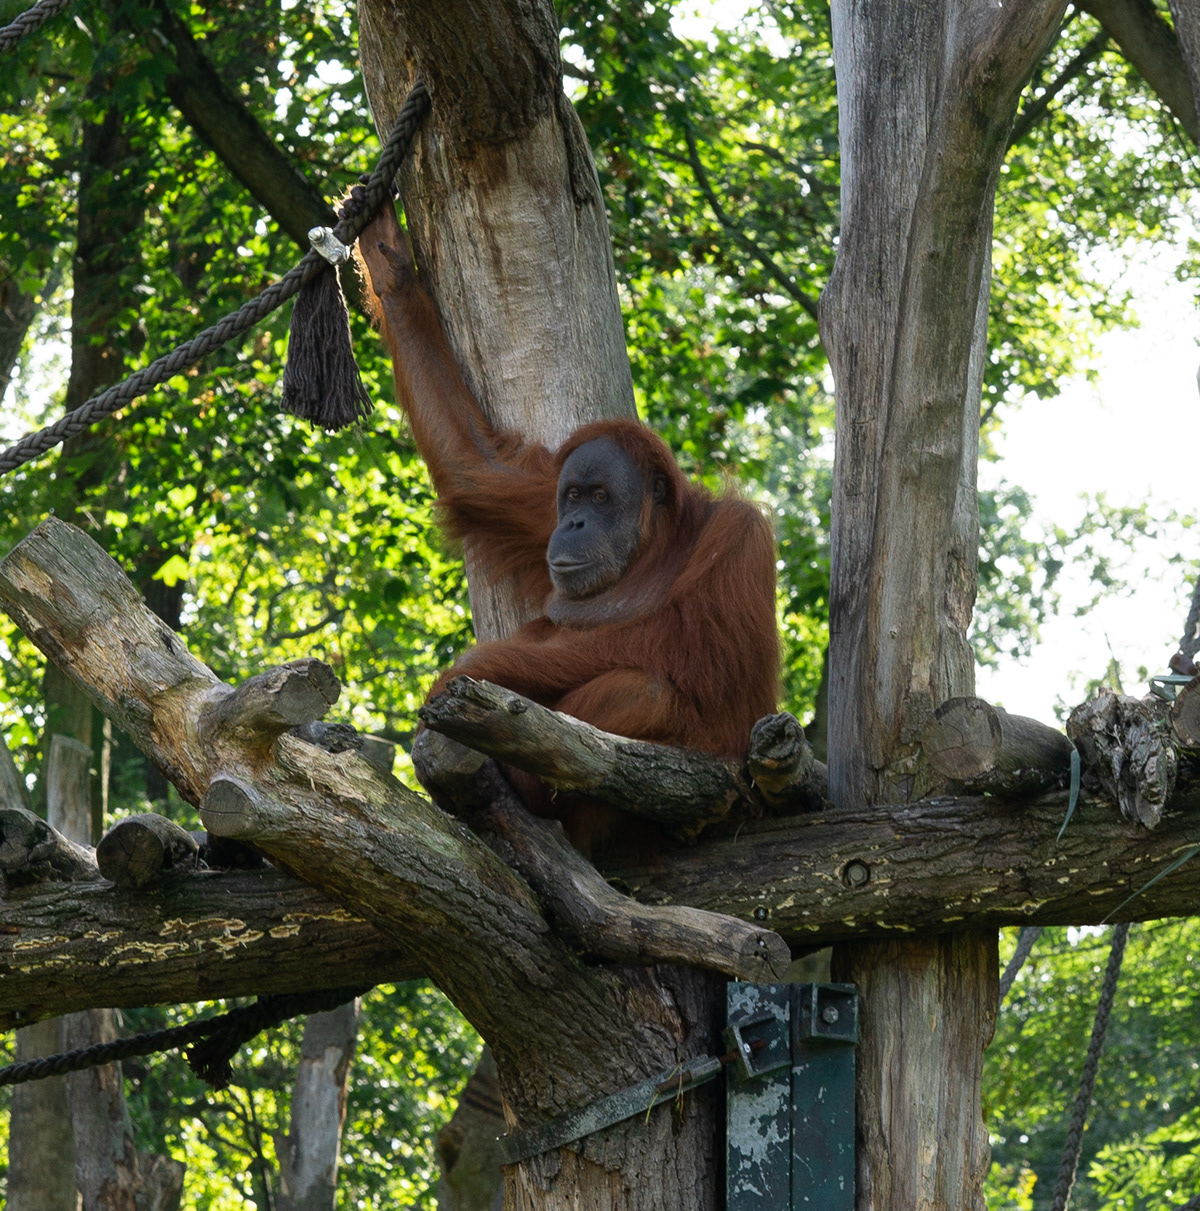 Orangutans are large primates native to the rainforests of Indonesia and Malaysia.